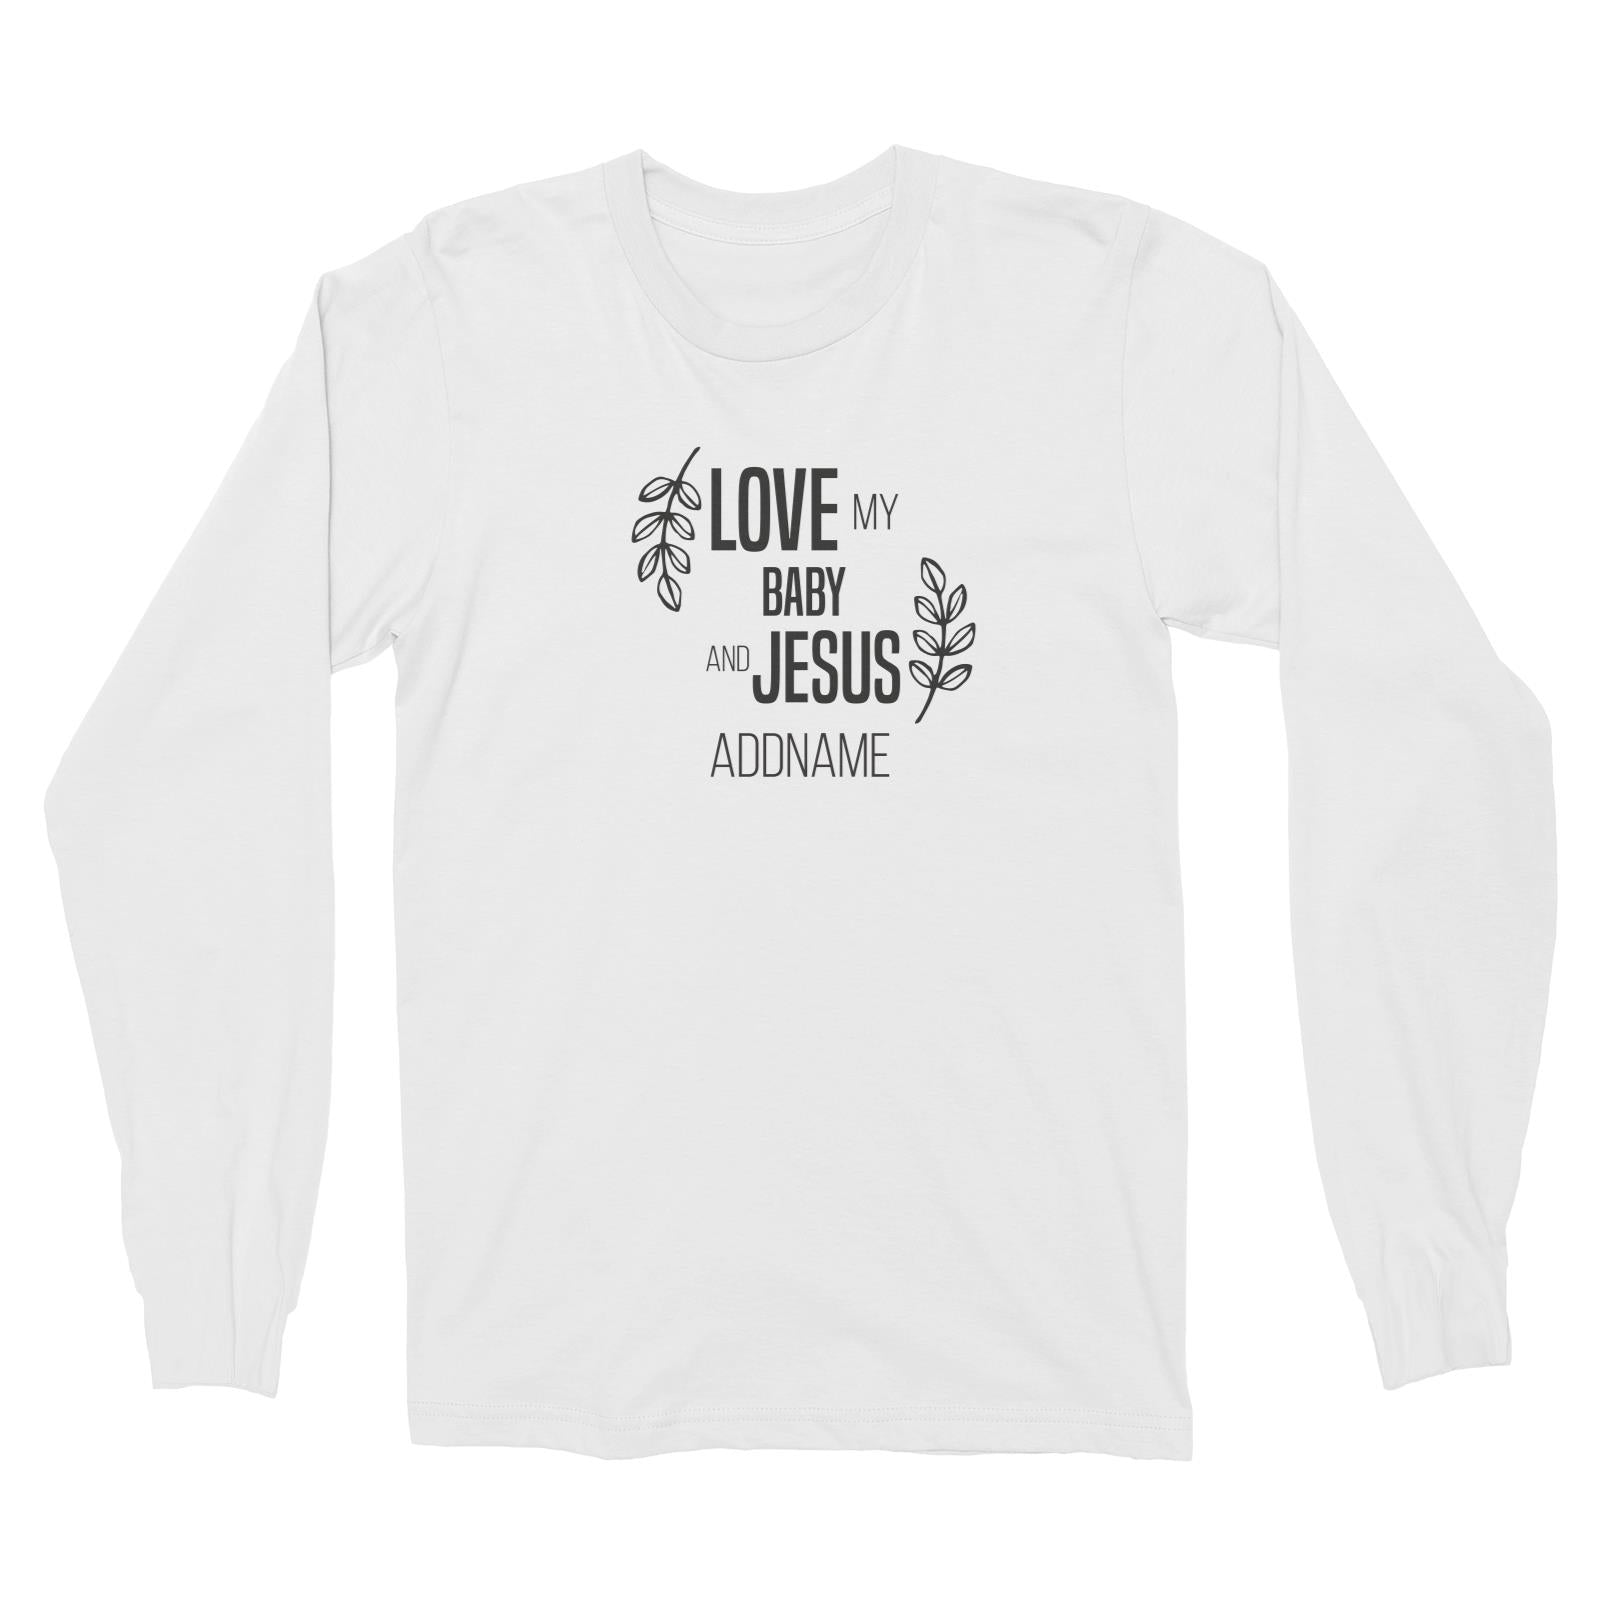 Christian Series Love My Baby And Jesus Addname Long Sleeve Unisex T-Shirt